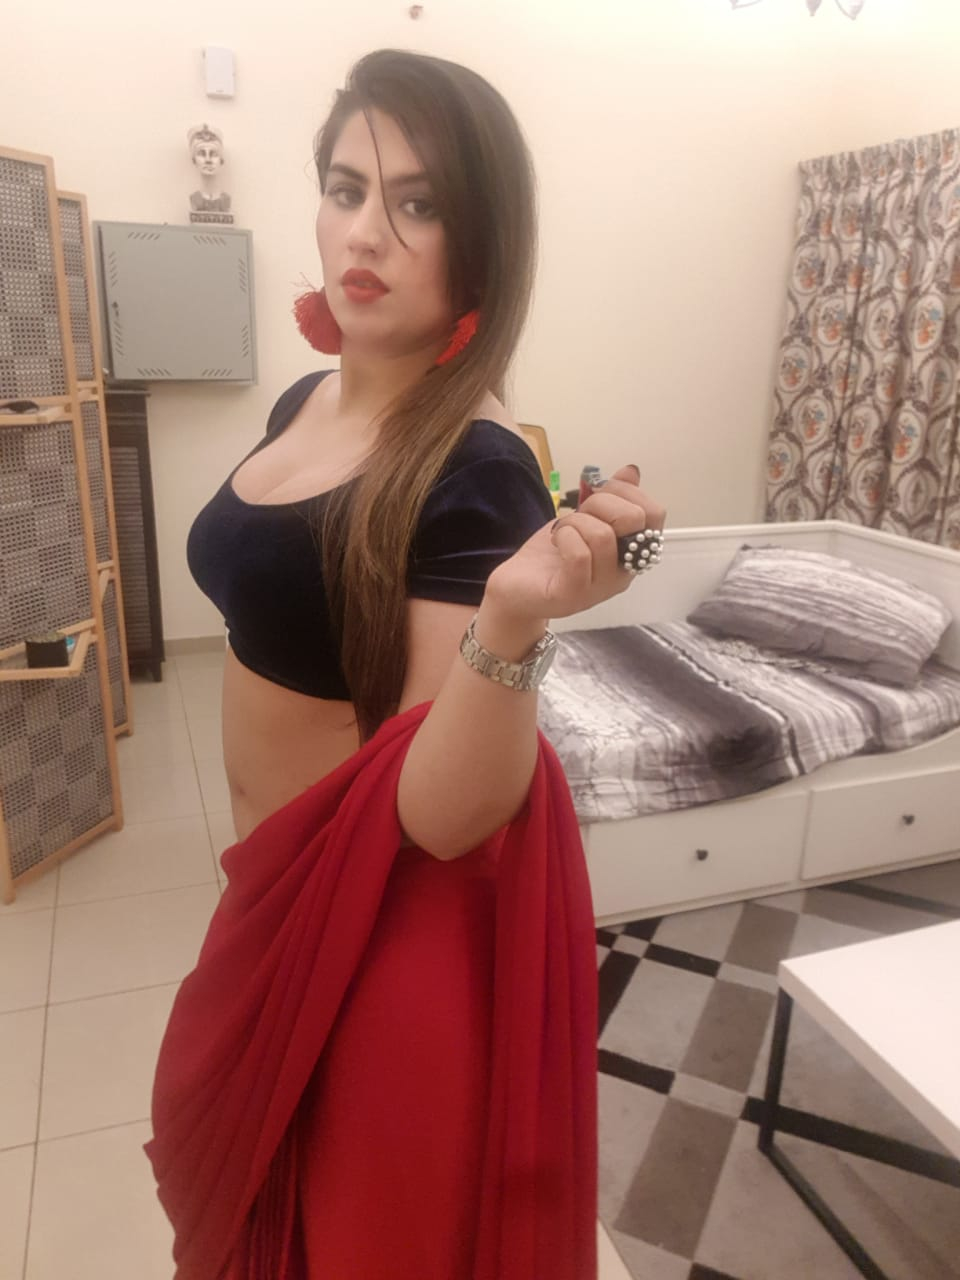 LOW RATE SIMRAN HIGH PROFILE CHANDIGRAH GIRL PAYMENT HAND TO HAND 24X7 OUTCALL AND INCALL